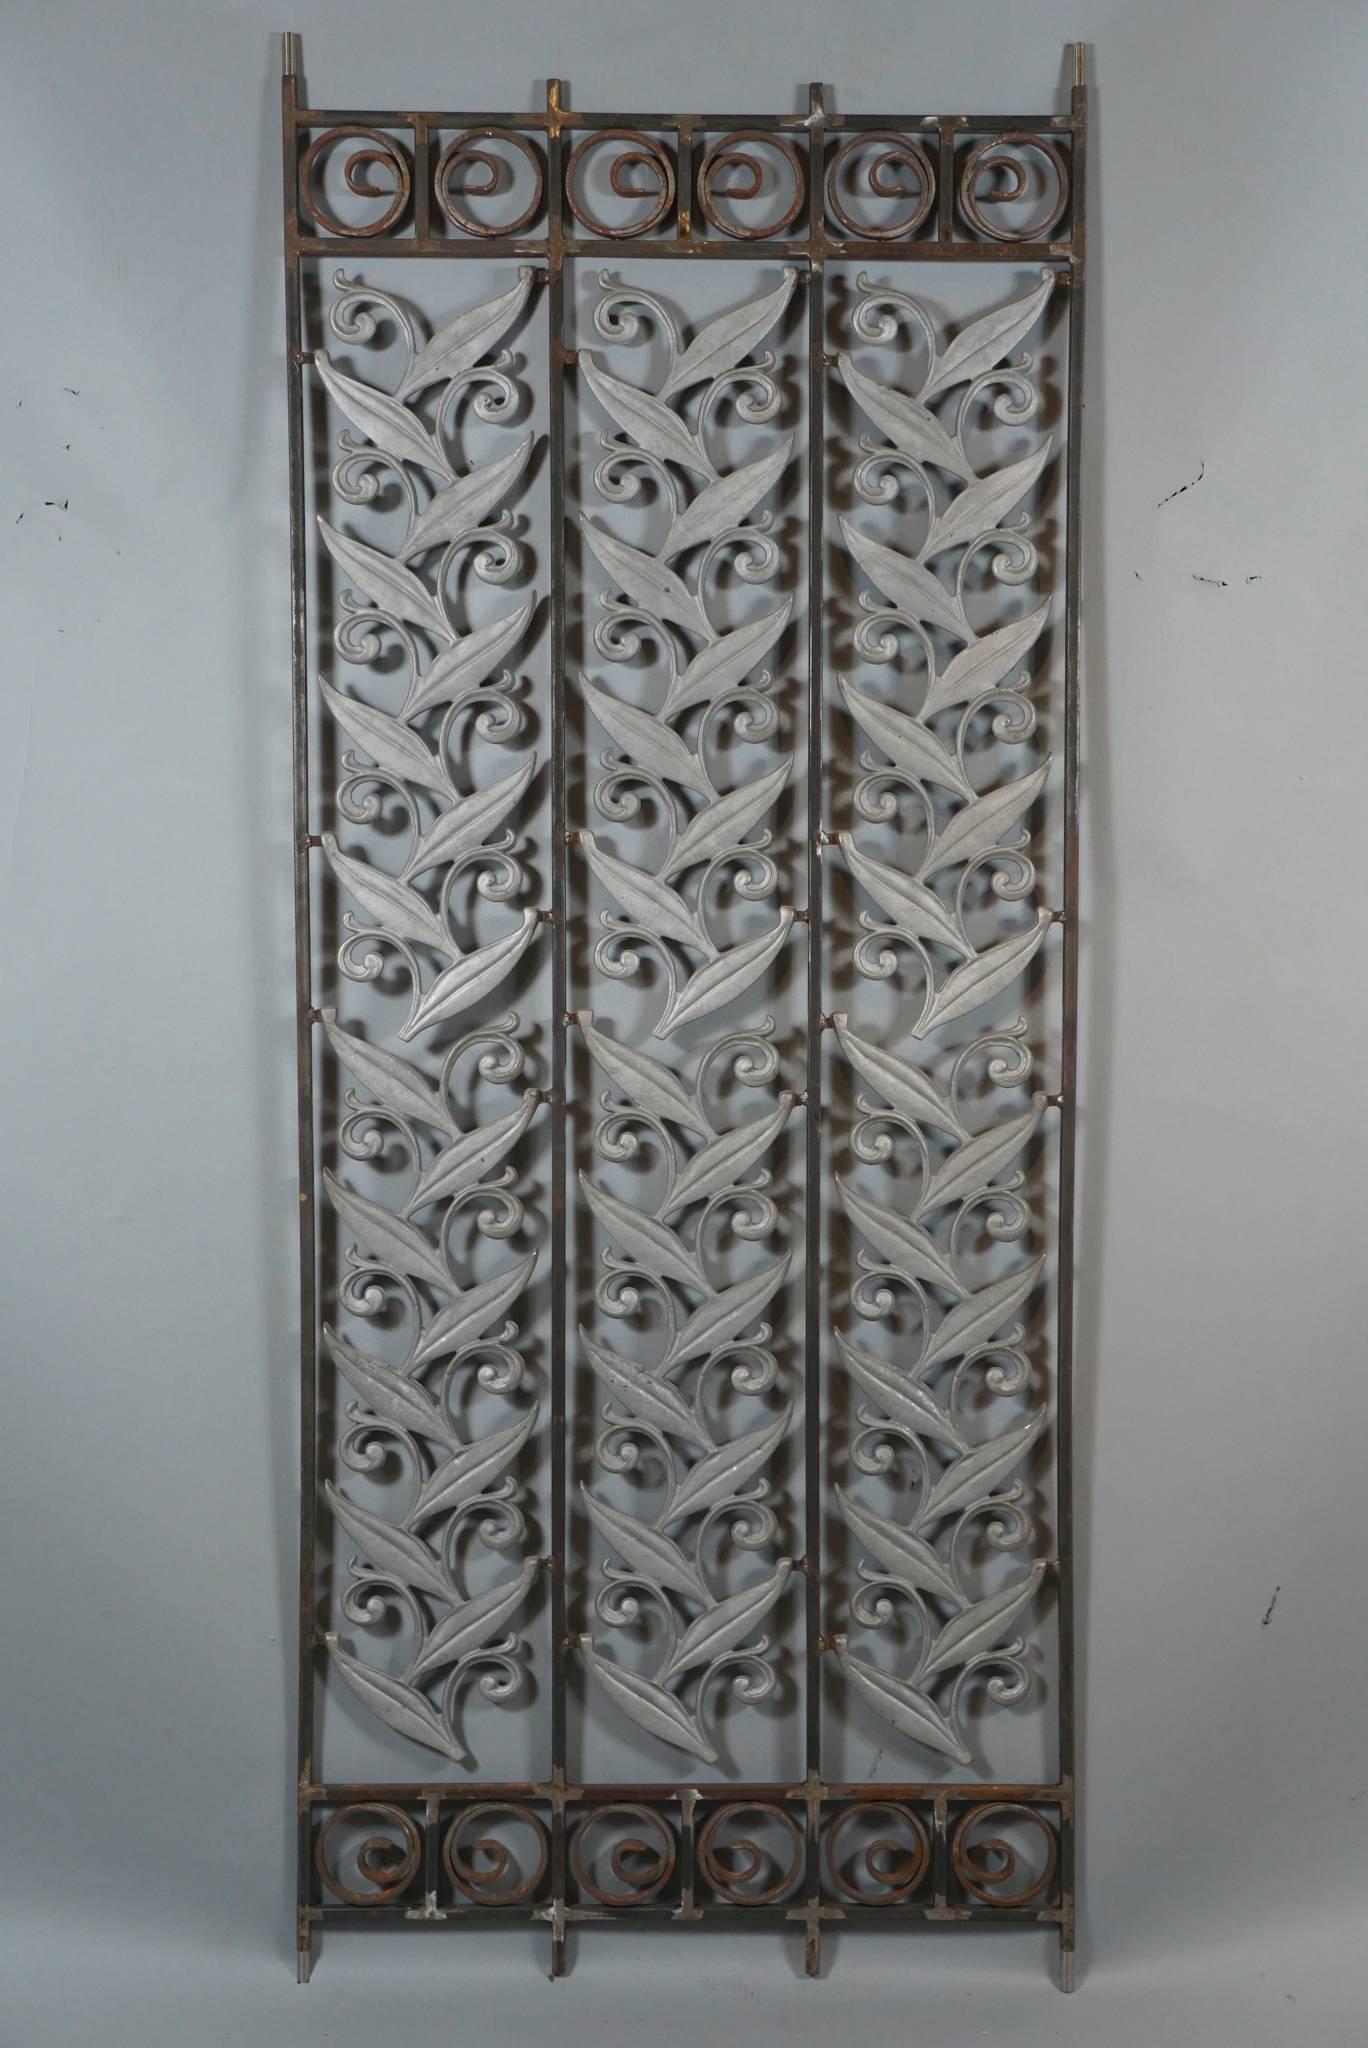 Four panels are available.
Each is framed with Iron. The botanical motifs in the centre are aluminium
Strong enough to be used as gates for exterior use. Can also be hung on interior walls
Each panel is $1,400 and can be sold in Pairs.